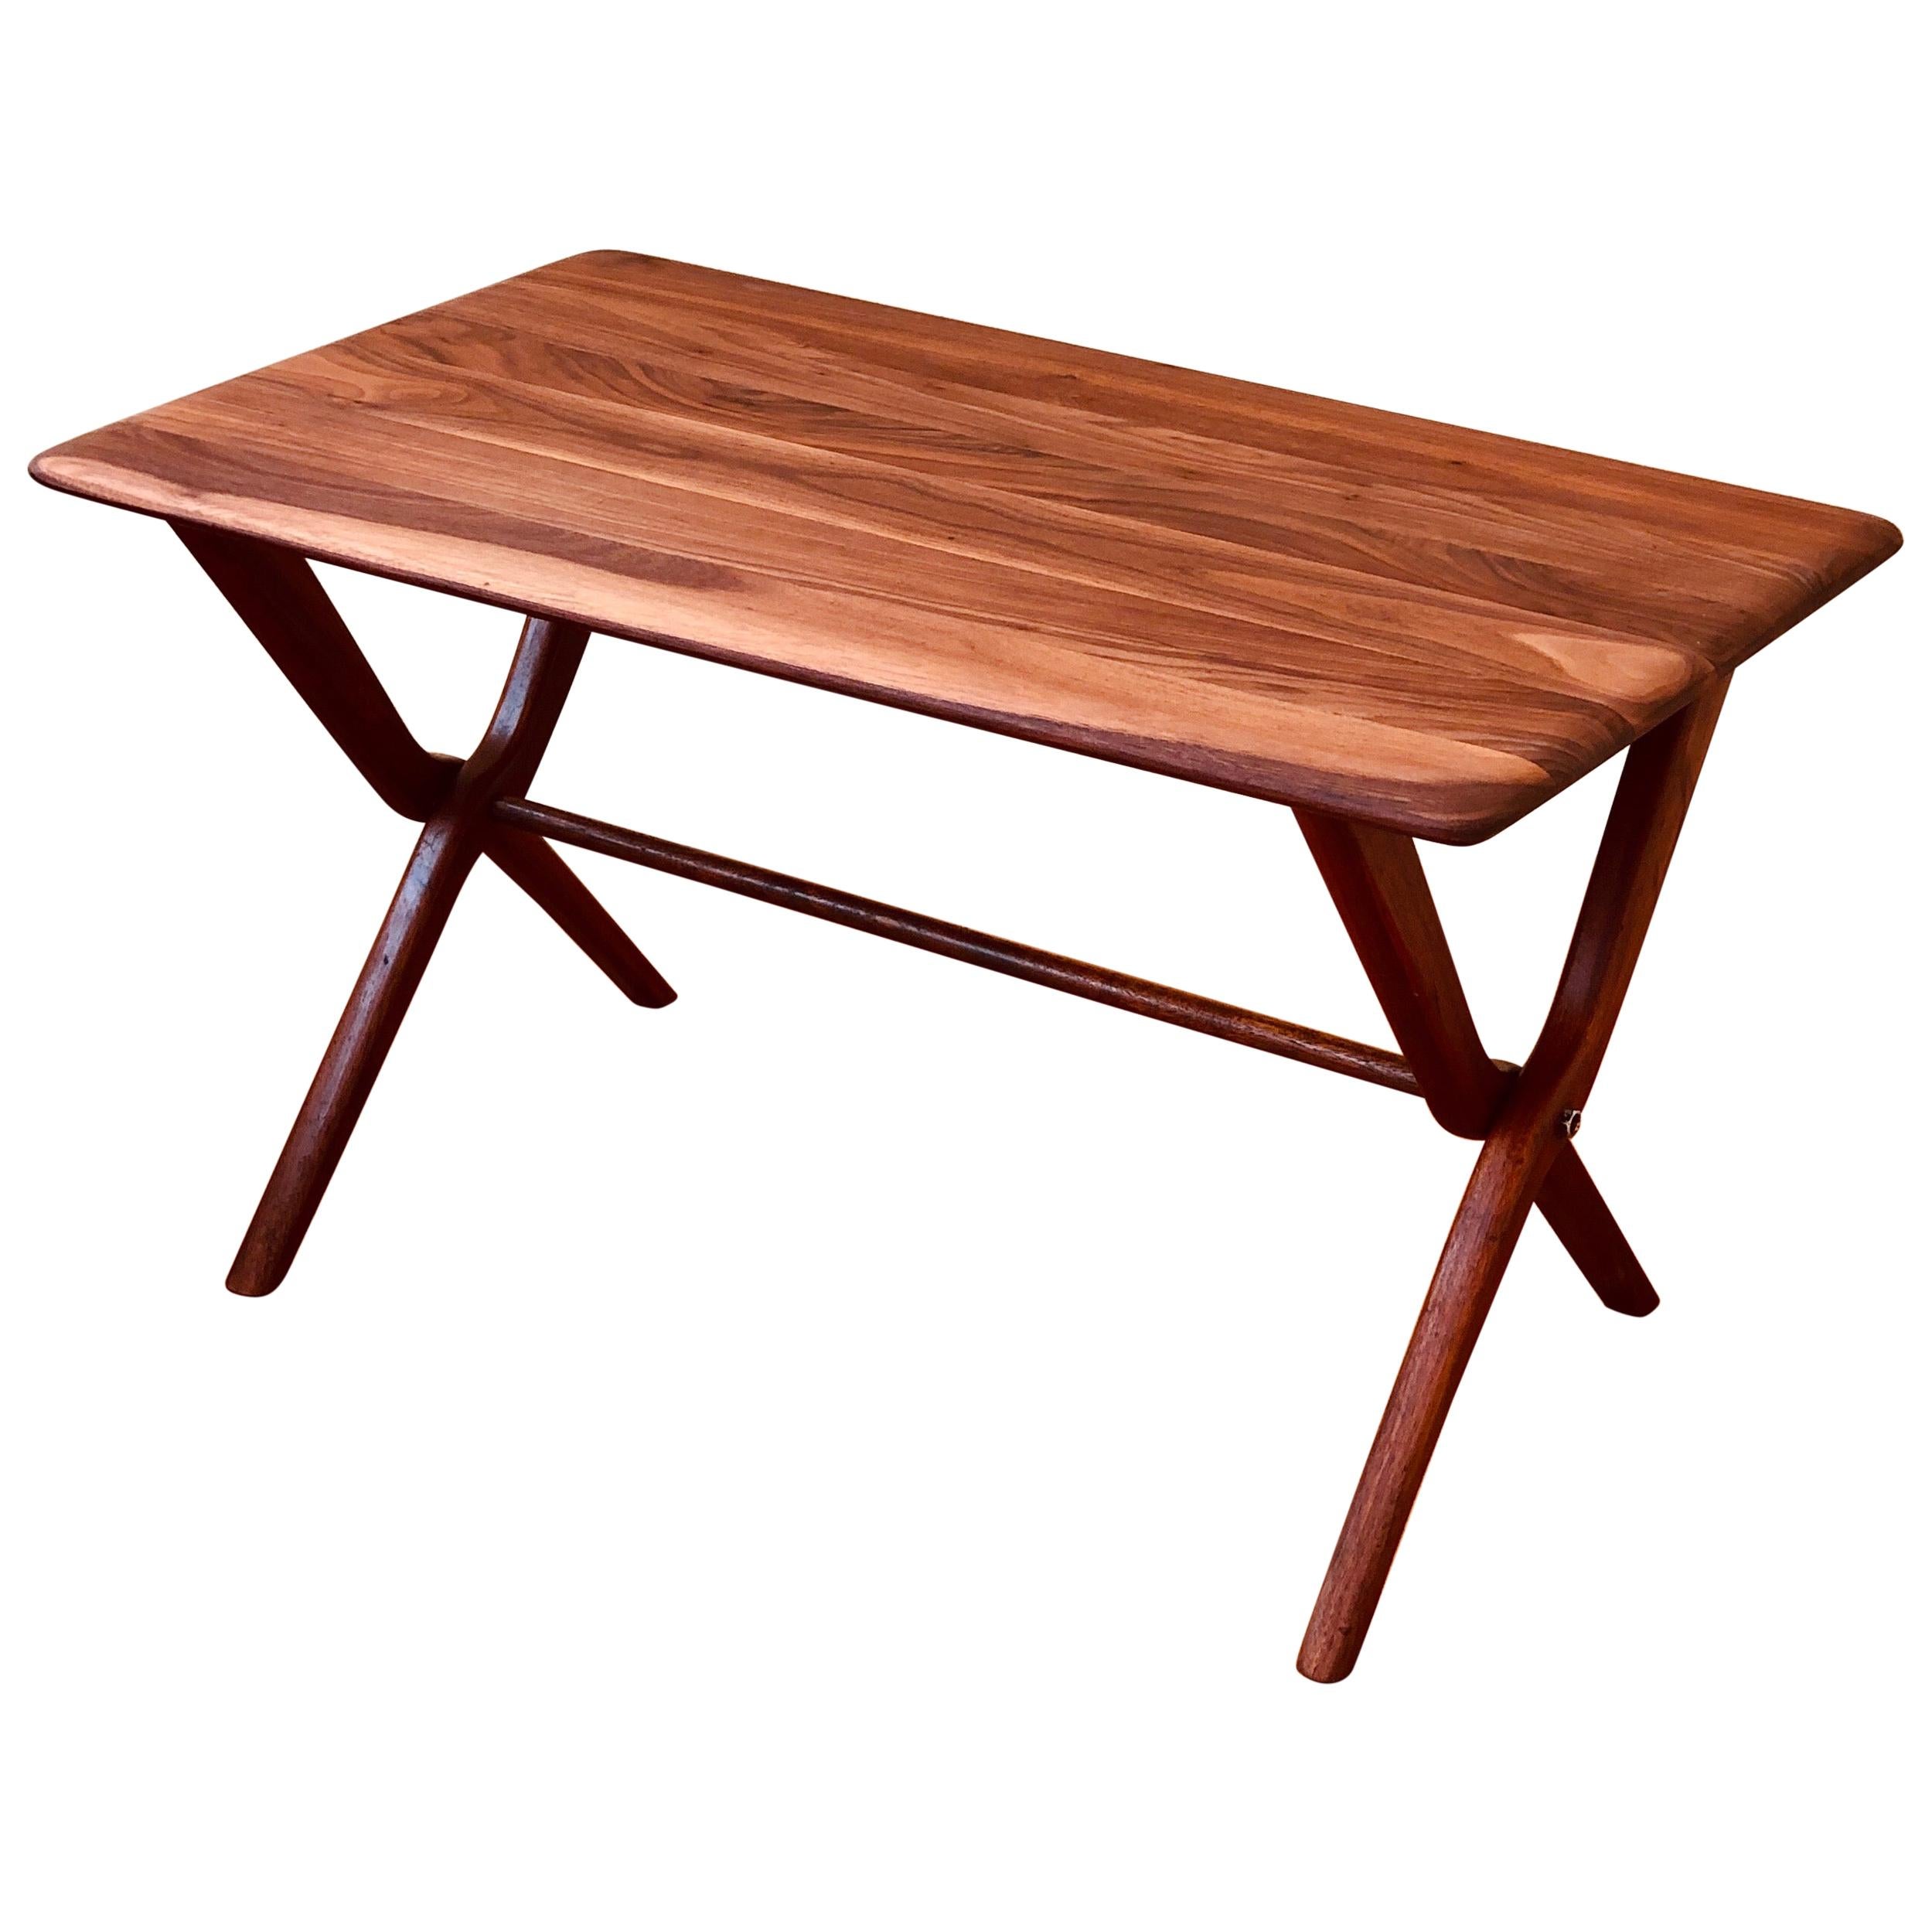 American Mid-Century Modern Solid Walnut Small Coffee Cocktail Table